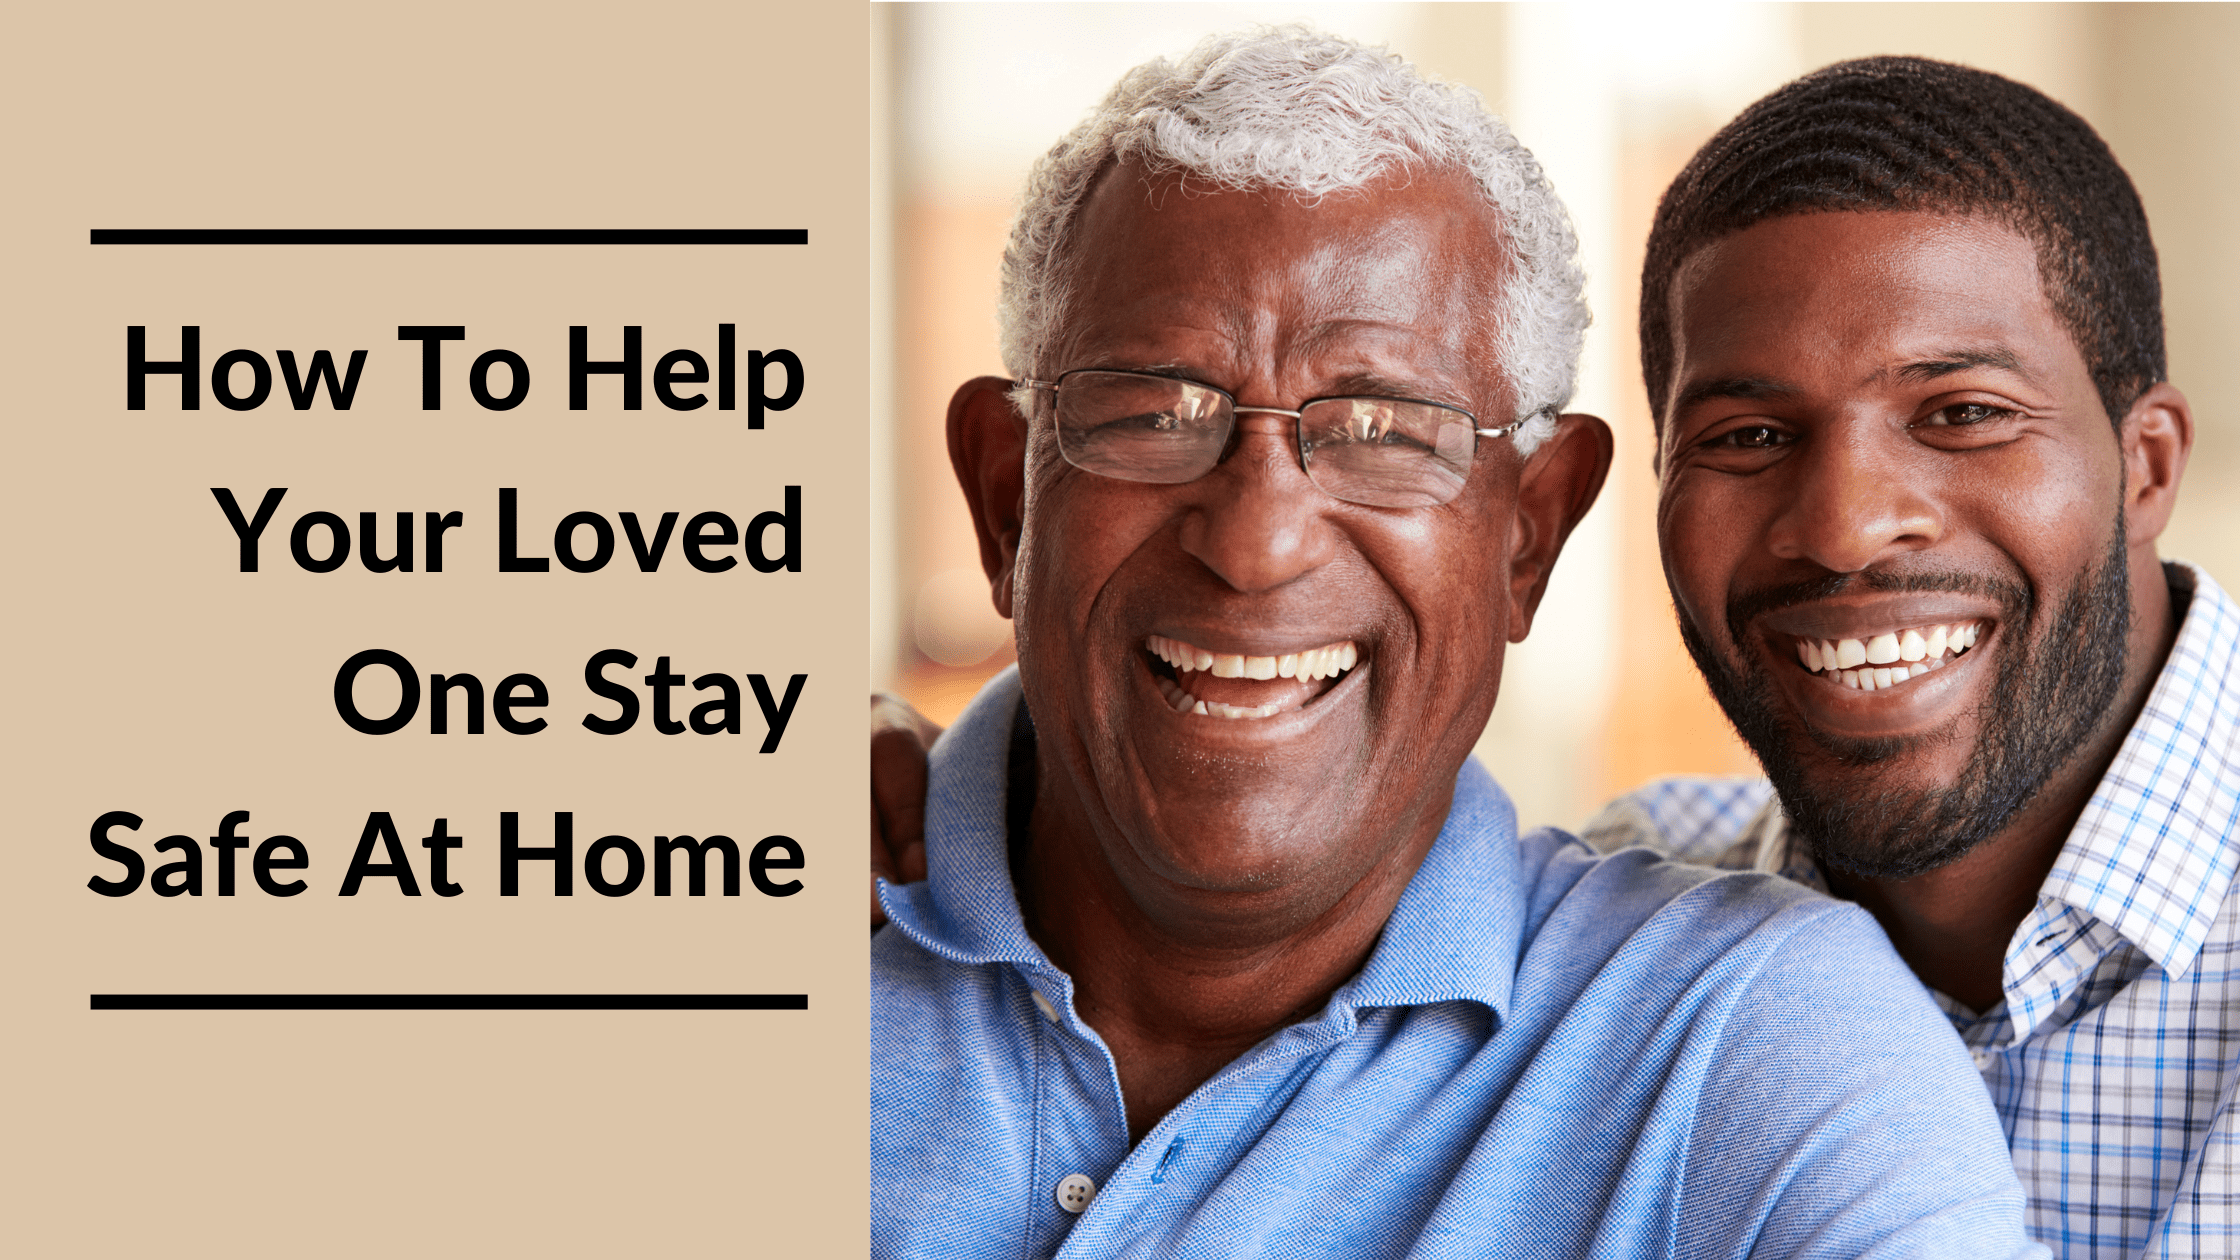 How To Help Your Loved One Stay Safe At Home Featured Image